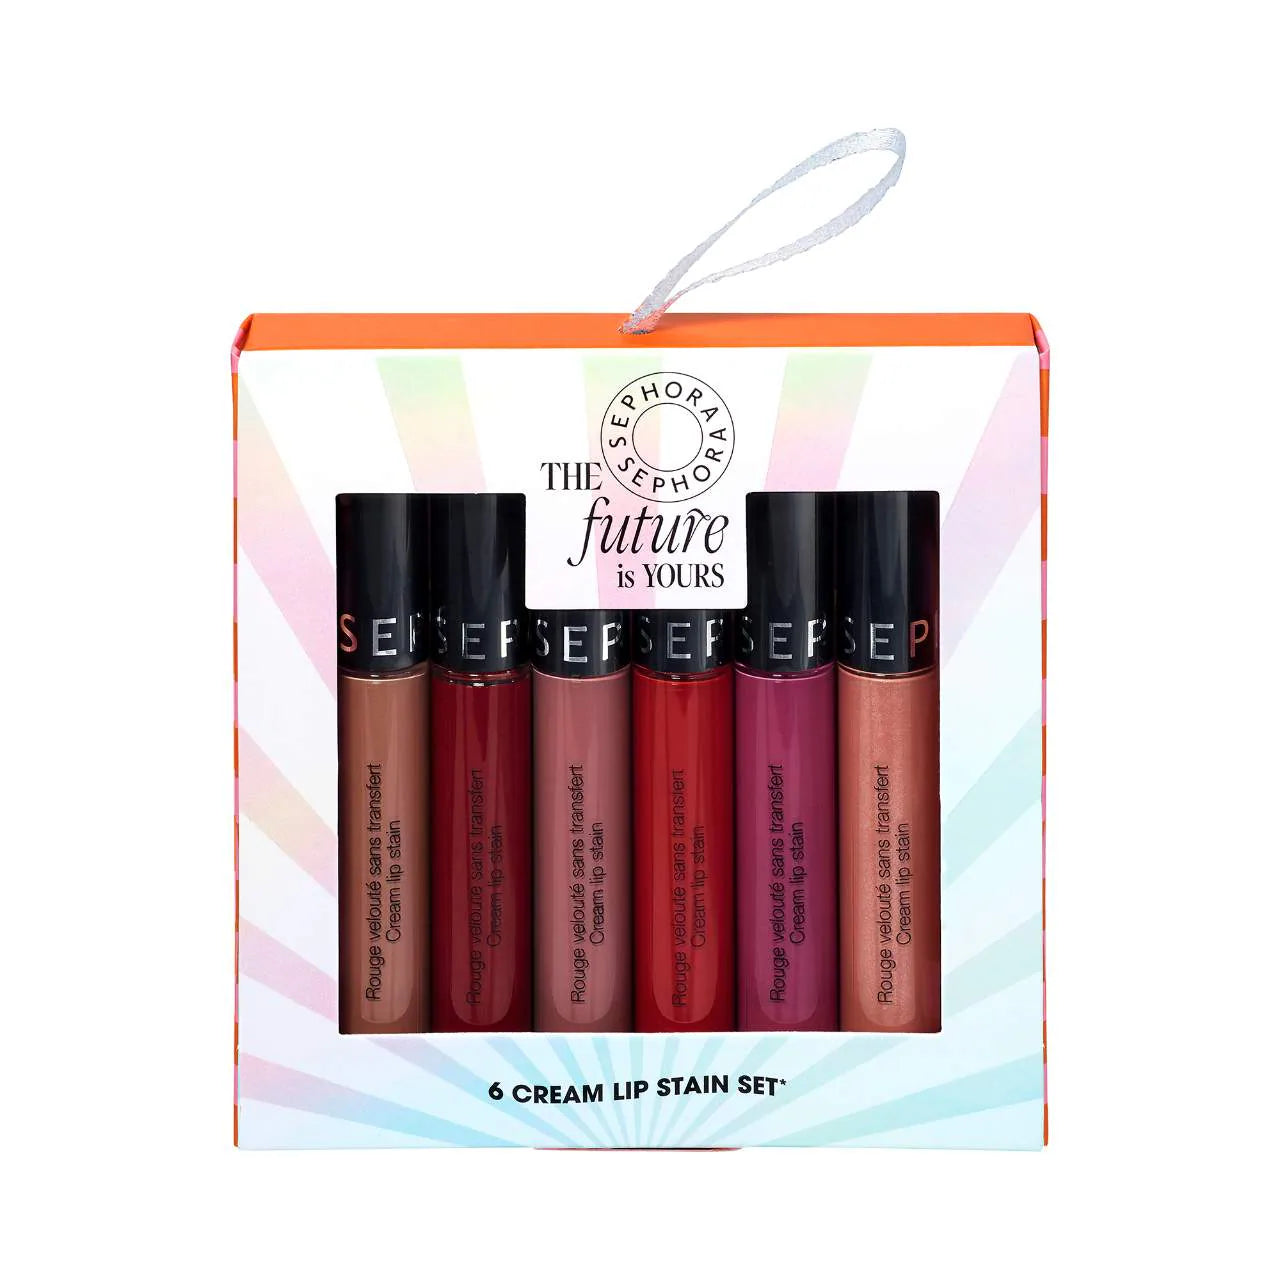 SEPHORA the future is yours 6 cream lip stain set